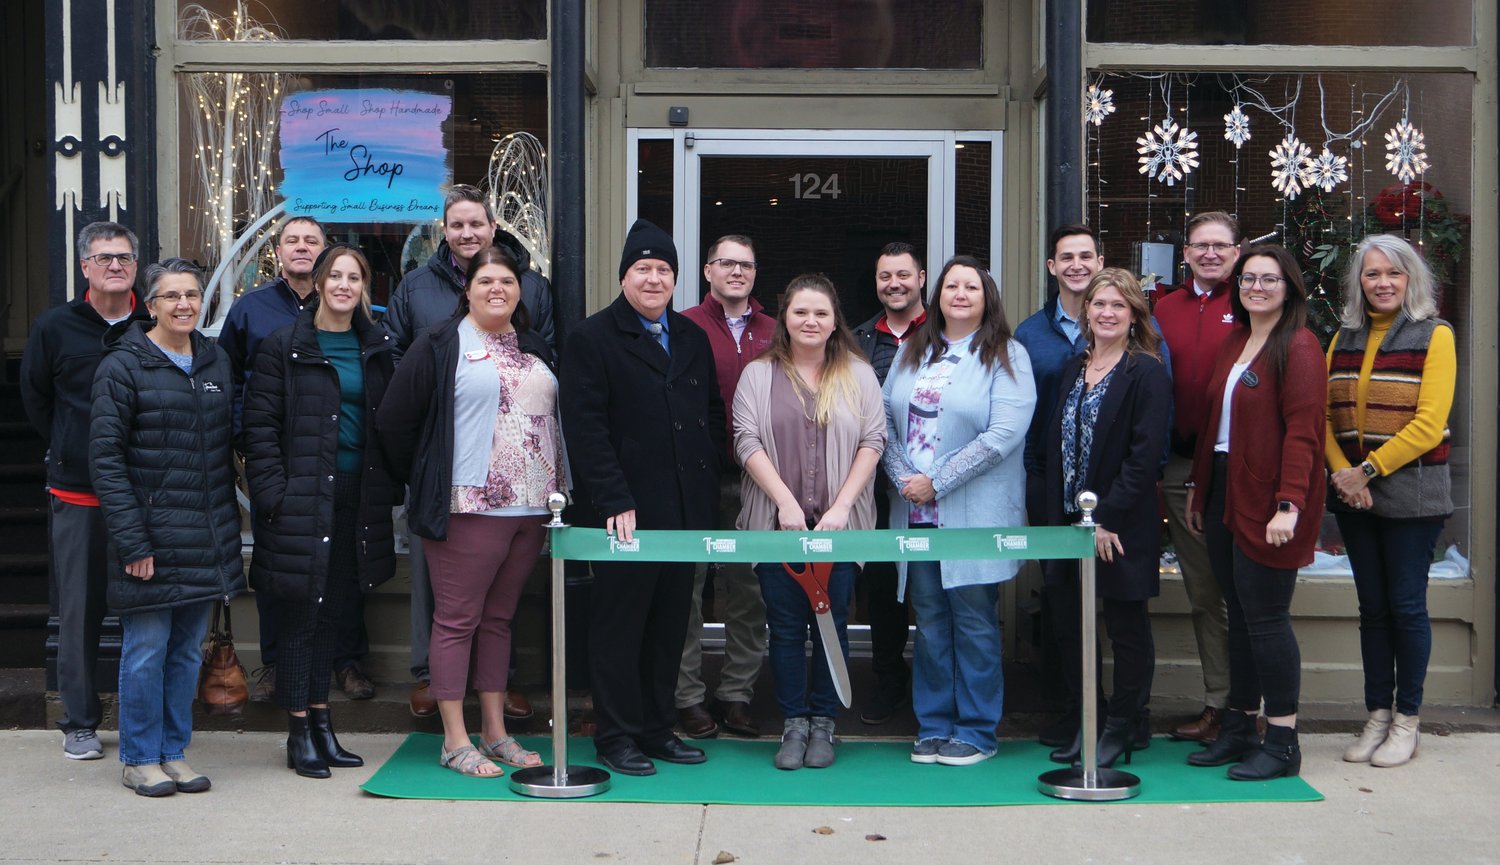 The Crawfordsville-Montgomery County Chamber of Commerce recently welcomed Shop Small Shop Handmade at 124 N. Green St. to historical downtown Crawfordsville with a ribbon cutting at their grand opening.